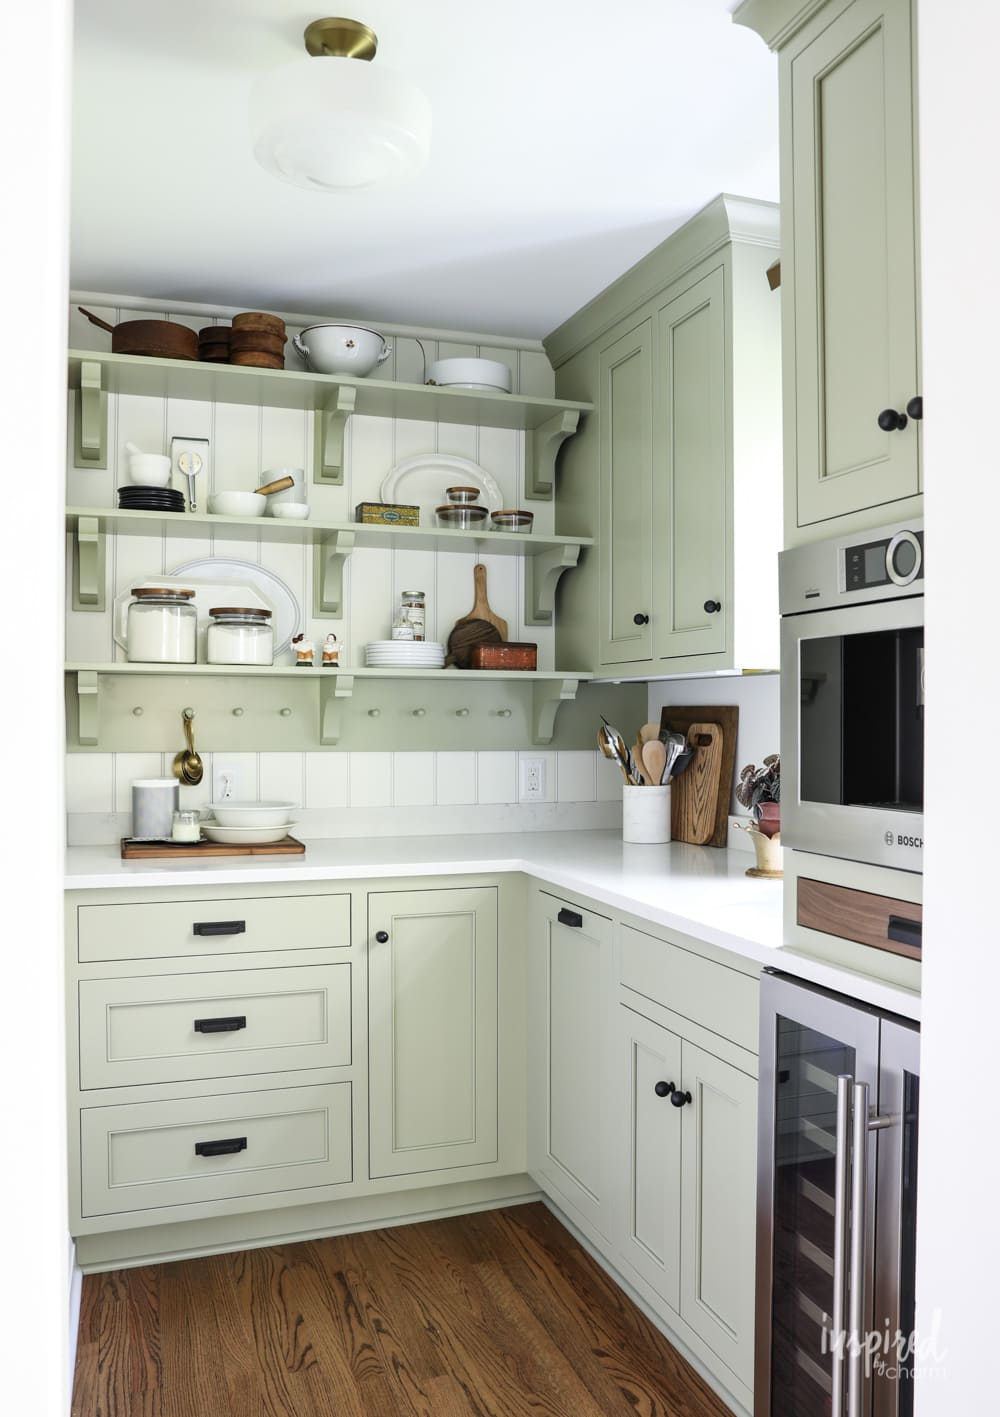 Bayberry Kitchen Remodel image with cabinetry in butler's pantry painted Sherwin-Williams sage.